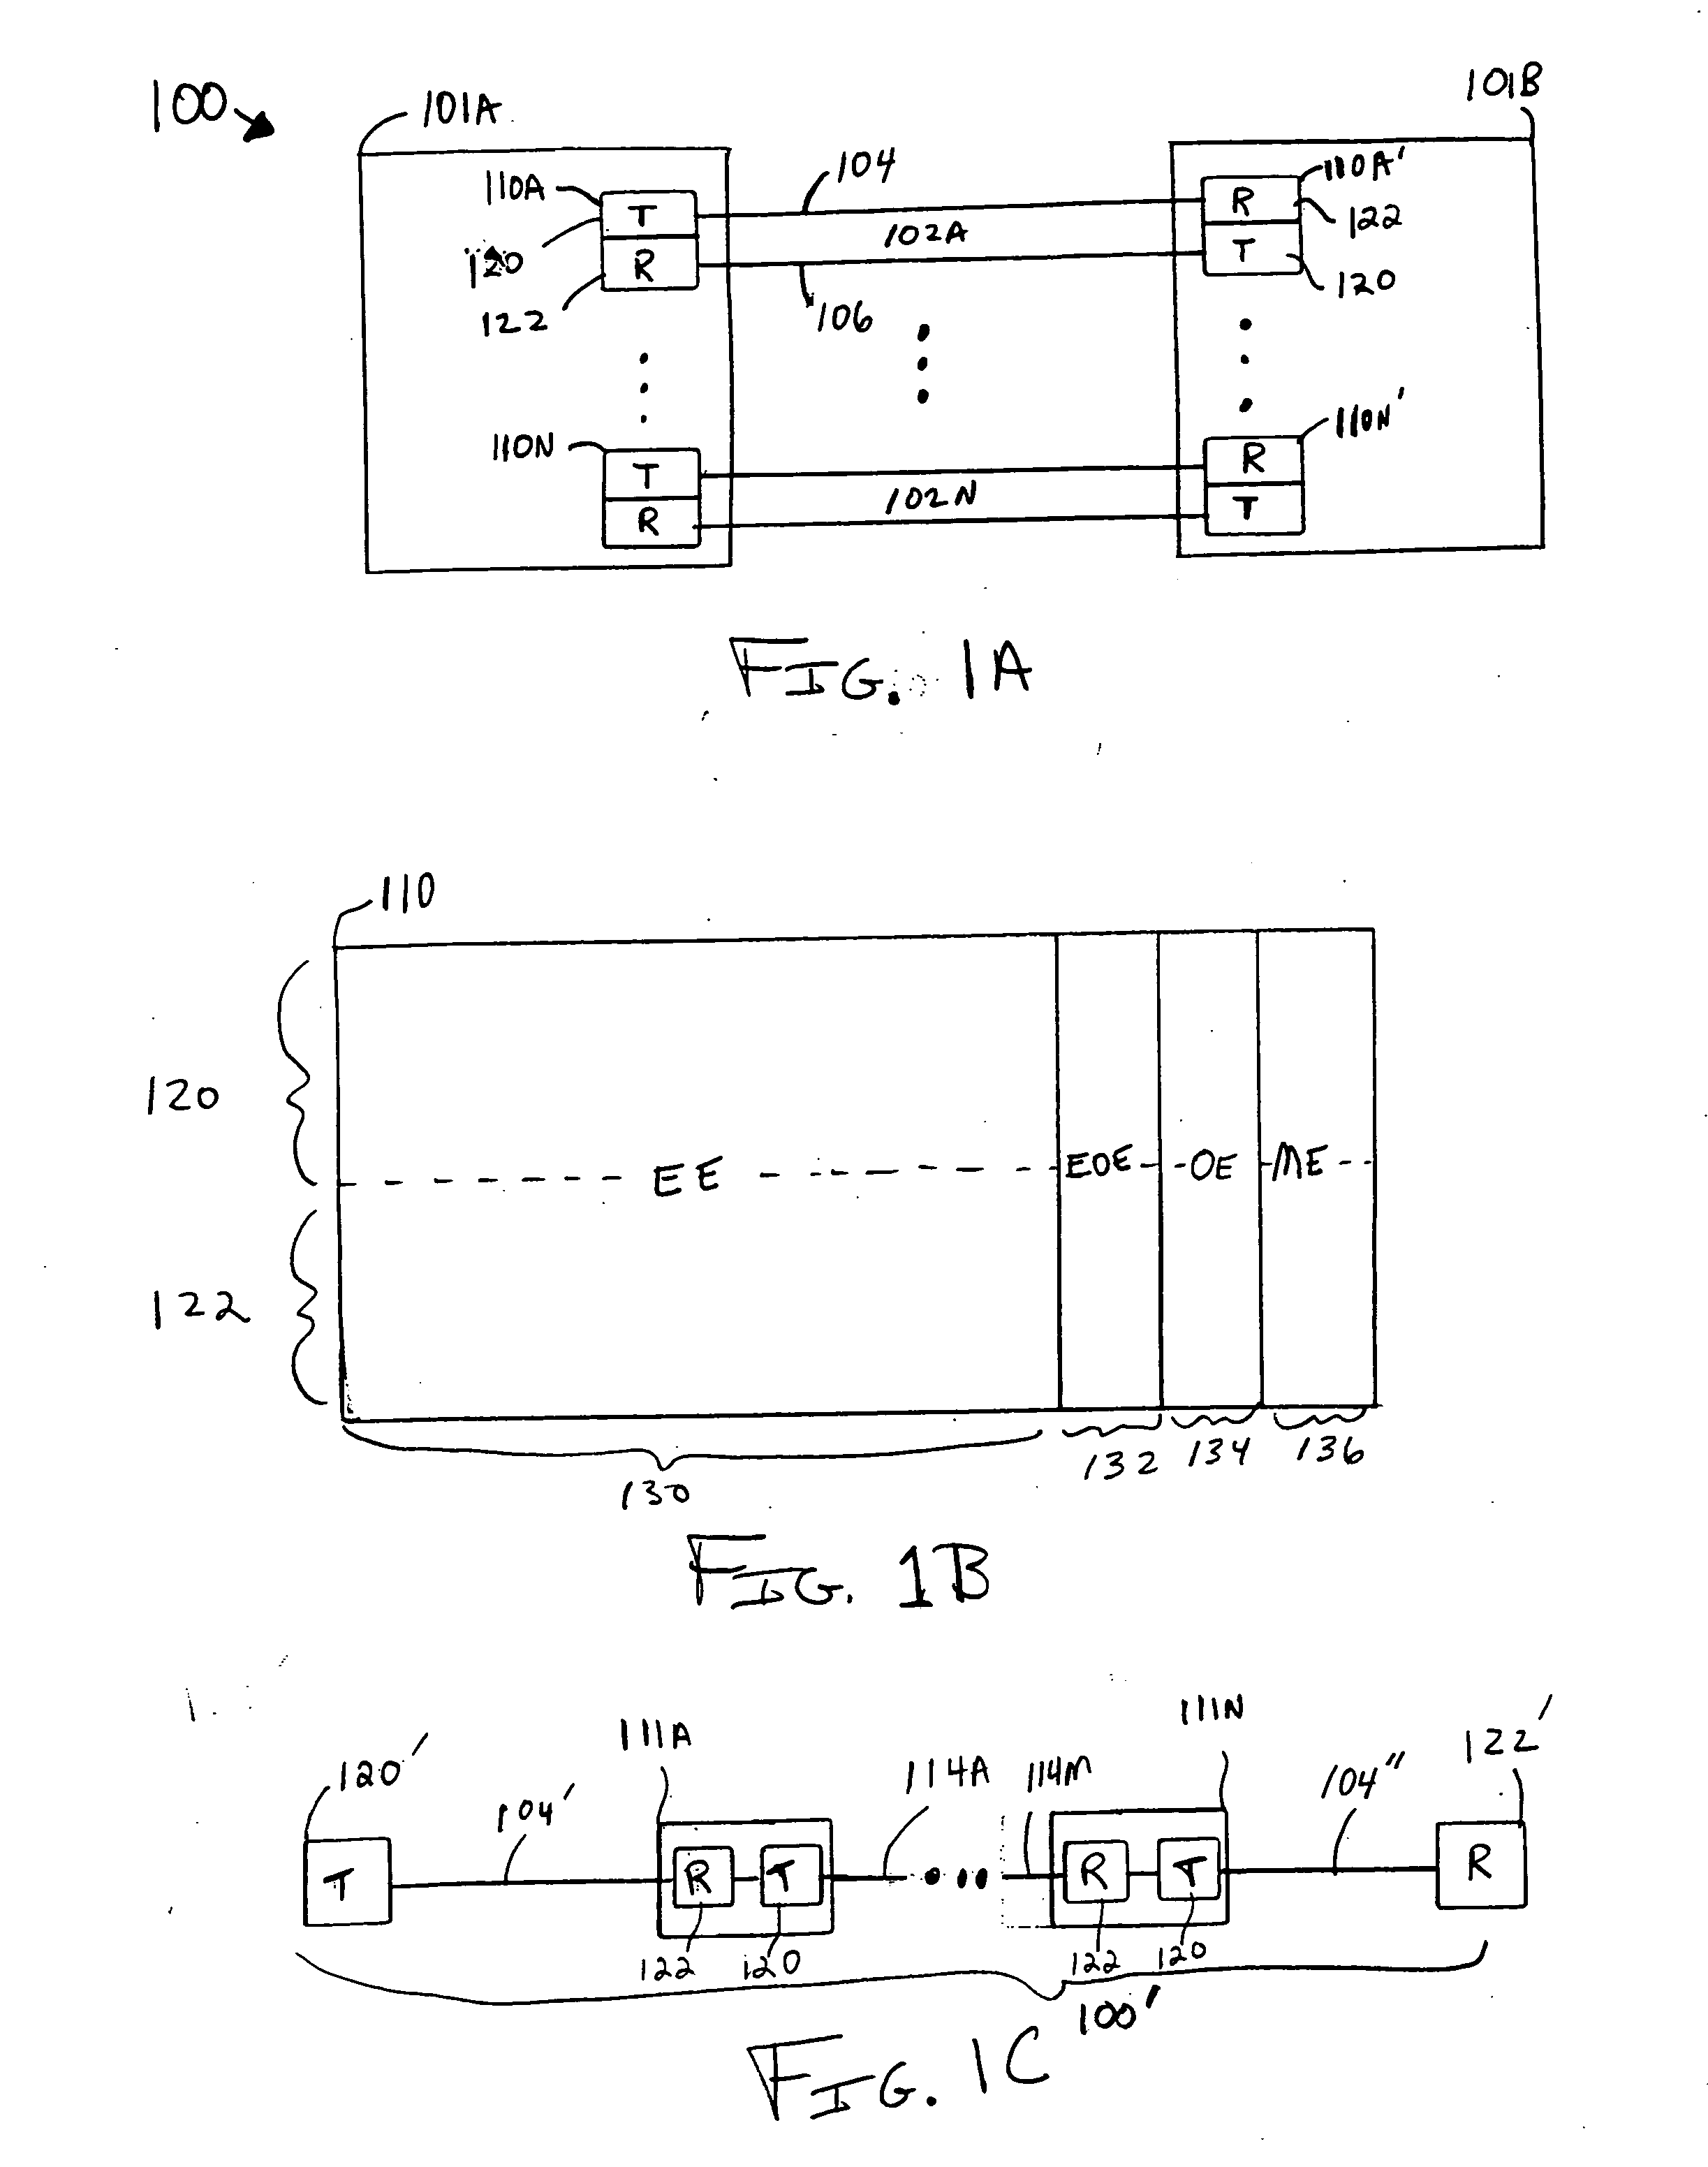 Apparatus with spread-pulse modulation and nonlinear time domain equalization for fiber optic communication channels